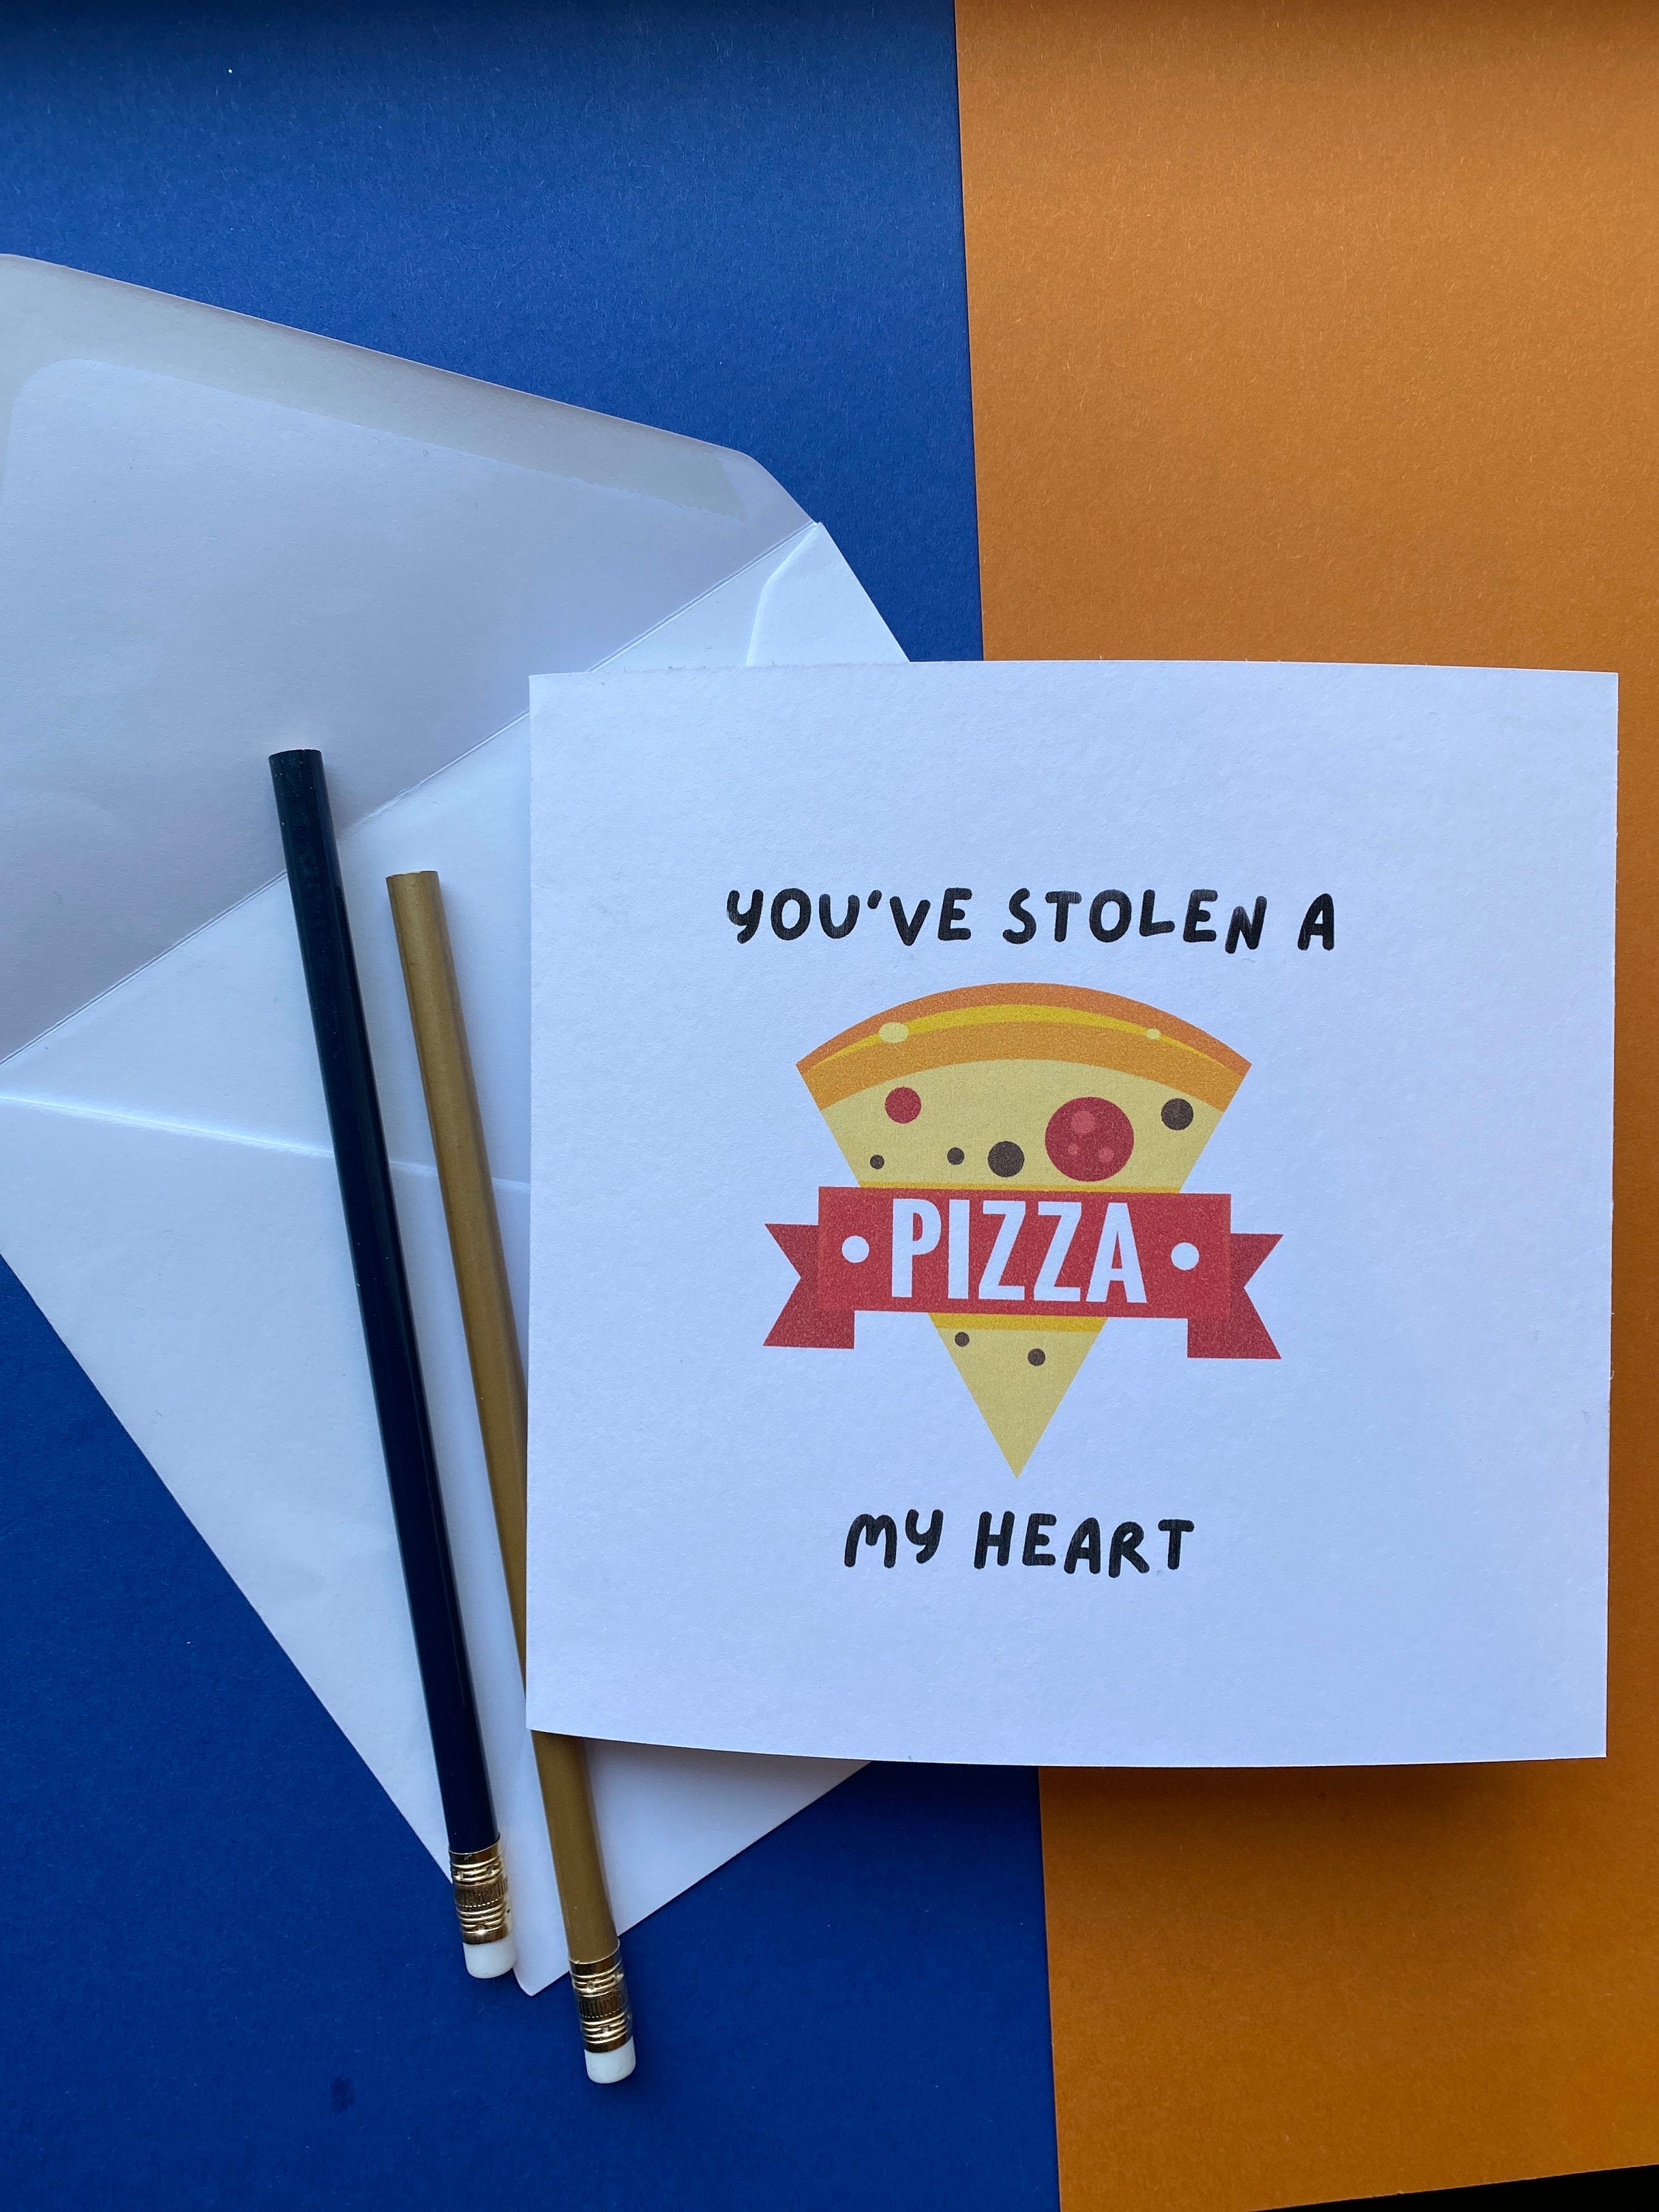 Valentines Card “you’ve stolen a pizza my heart”